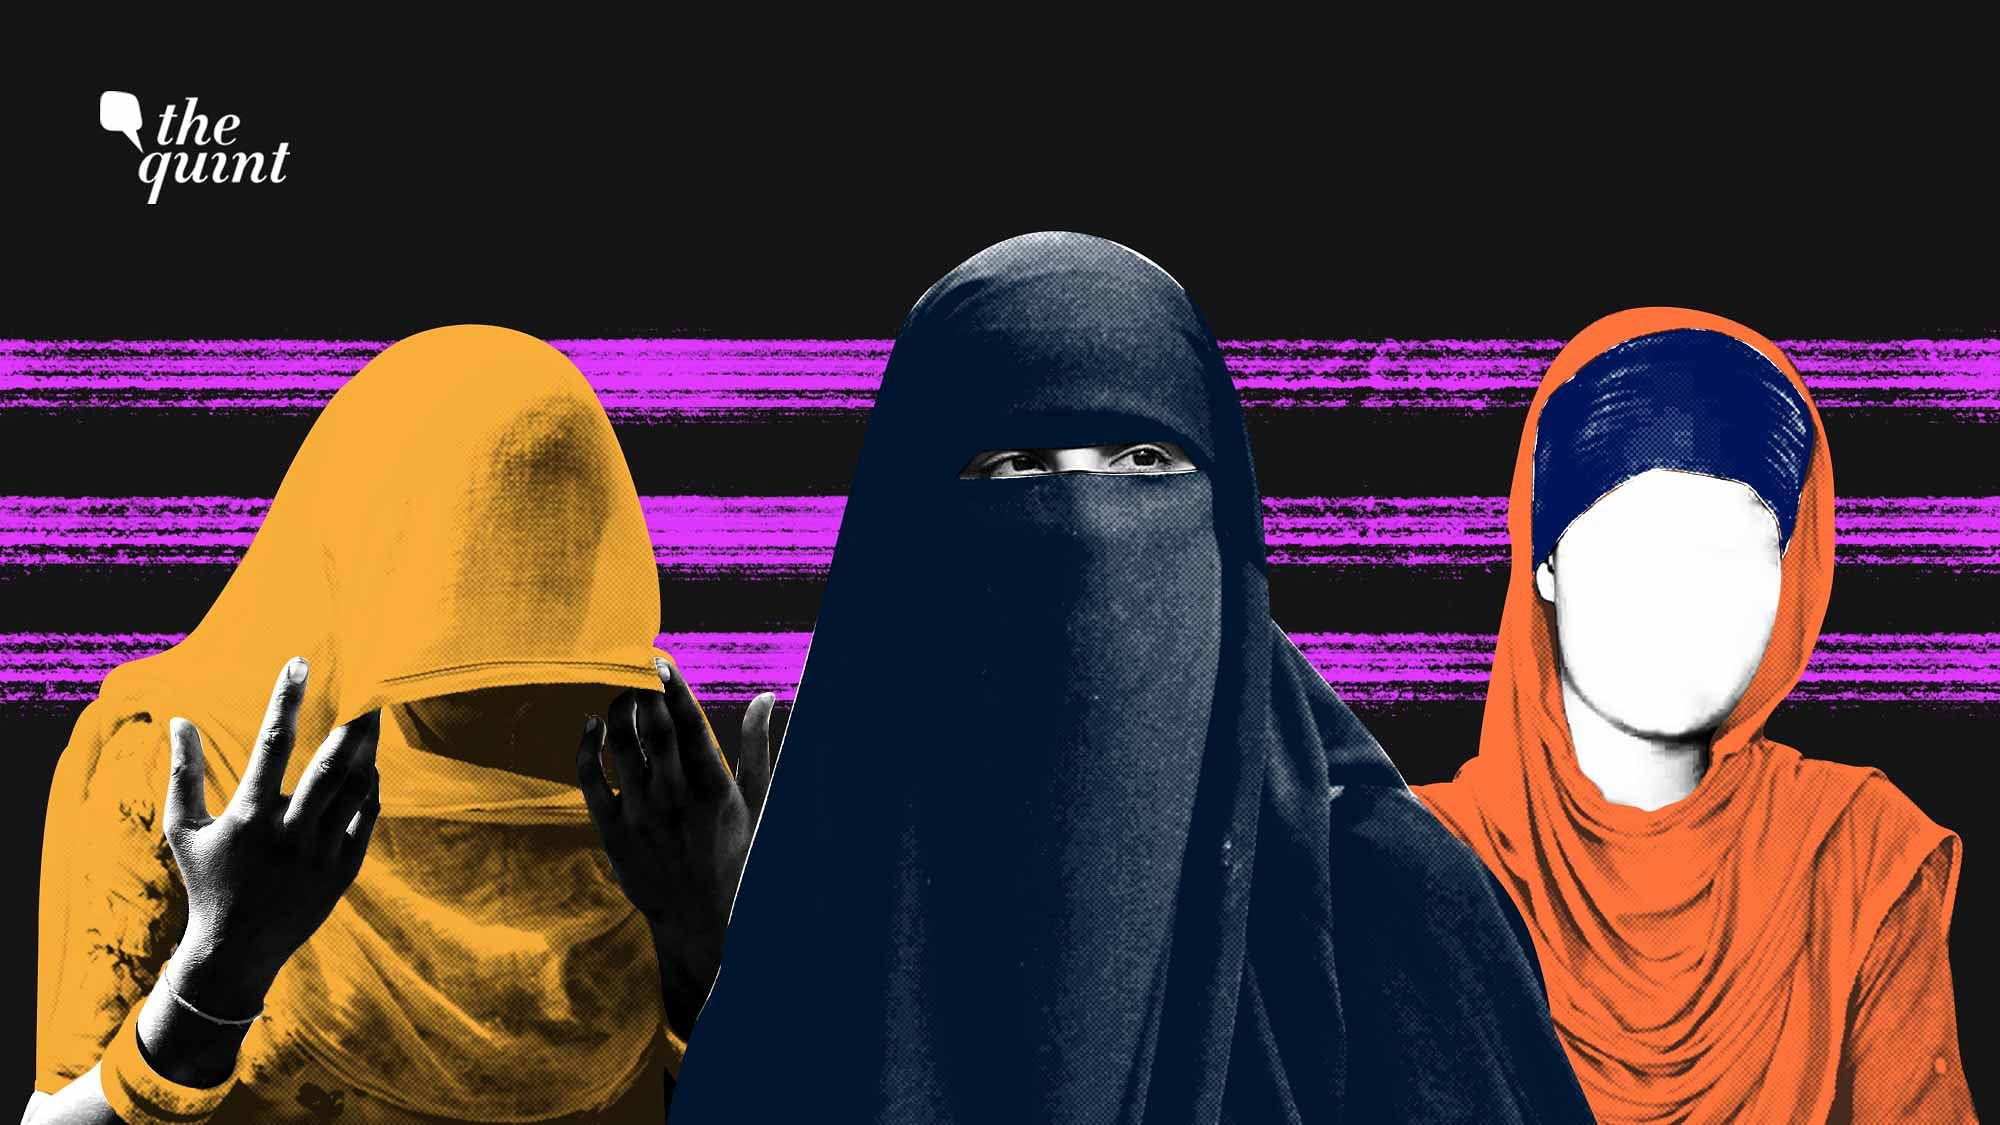 <div class="paragraphs"><p>Head coverings are relatively common among Indian women. About six in 10 women in India (61 percent) say they  cover their heads outside of their homes, according to a <ins><a href="https://www.pewforum.org/2021/06/29/religion-in-india-tolerance-and-segregation/">Pew Research Center survey</a></ins> conducted in 2019-2020.</p></div>